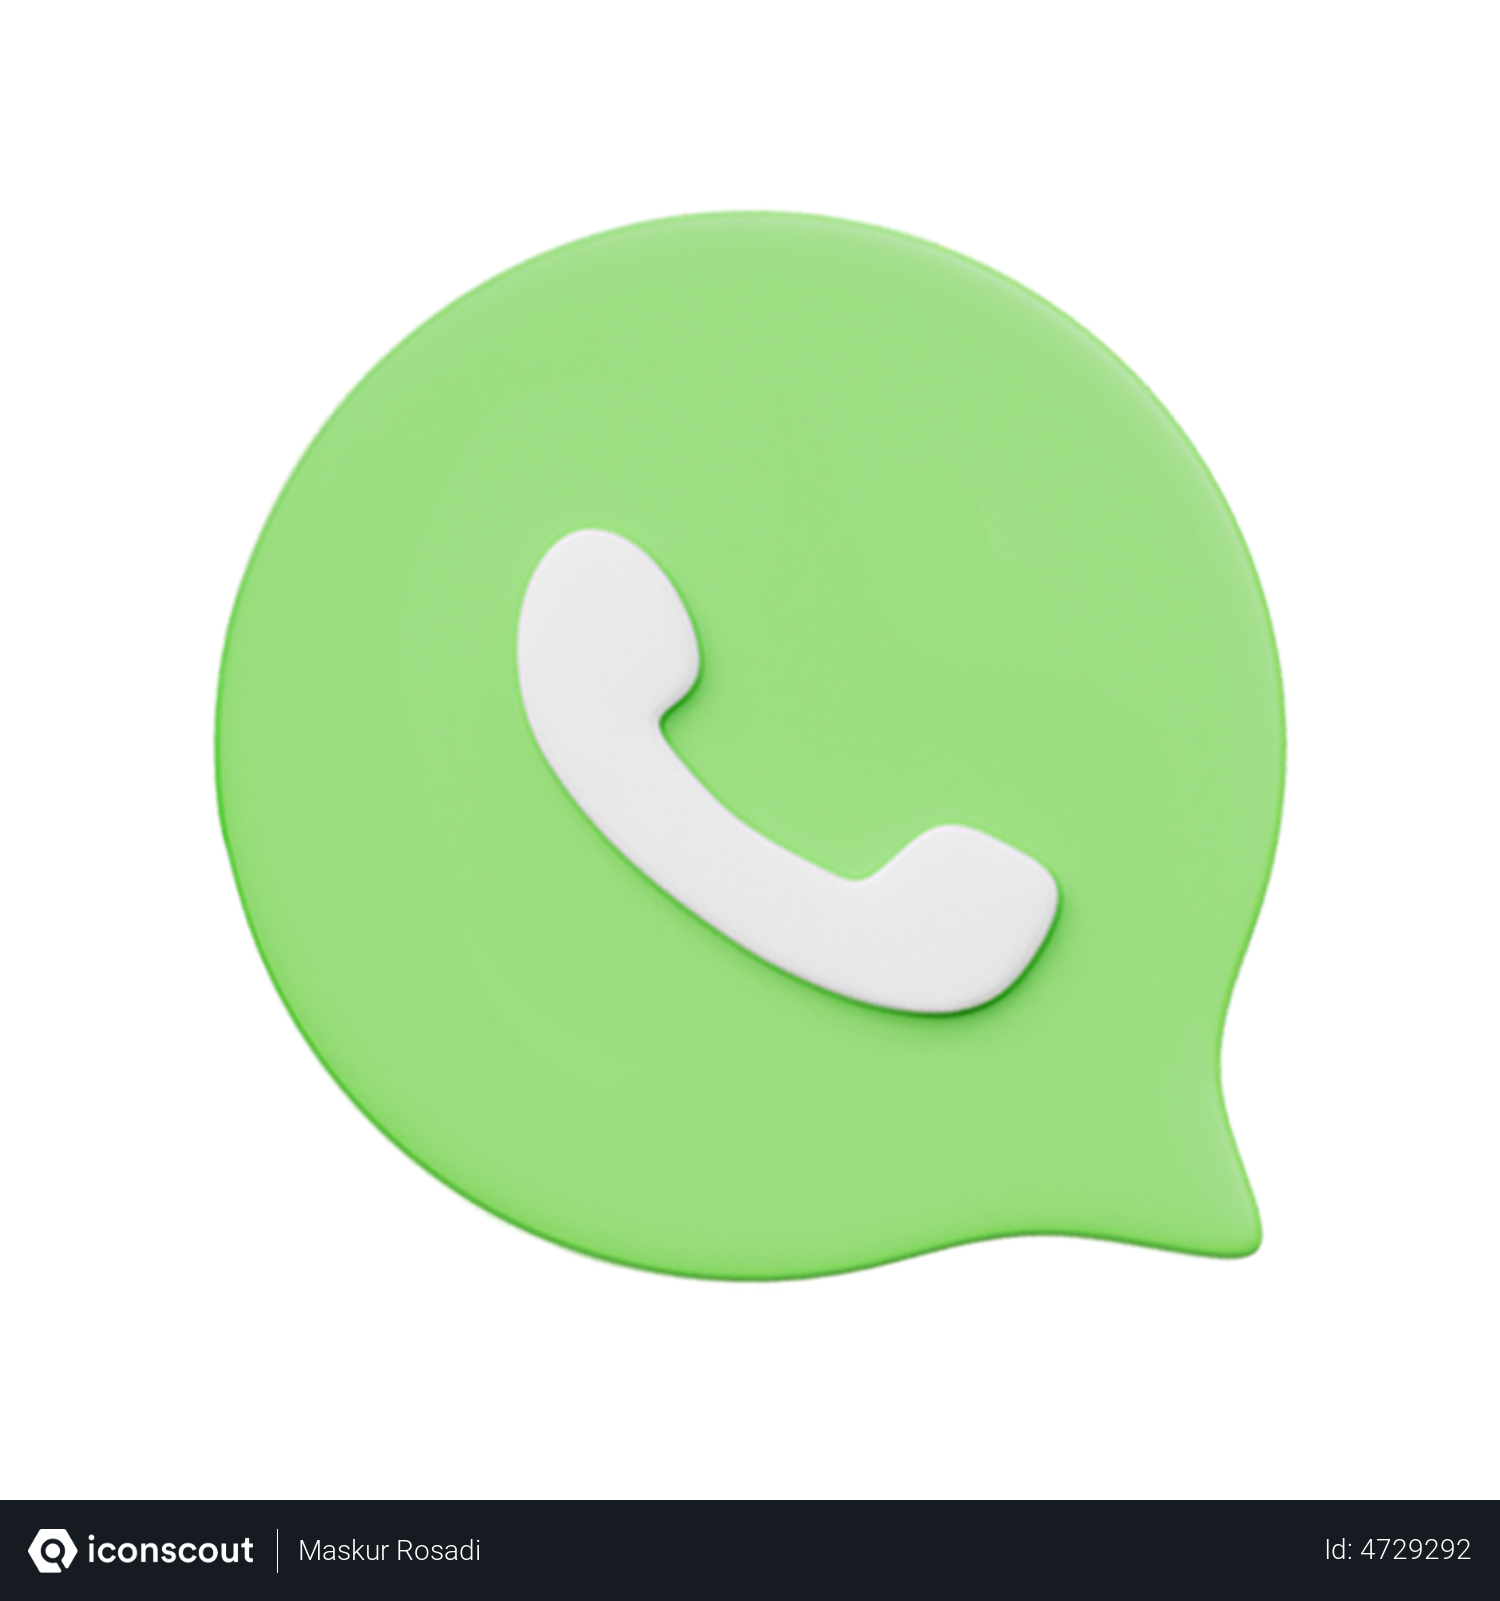 WhatsApp Adds Discord-like Voice Chats to Simplify Group Calling | Beebom